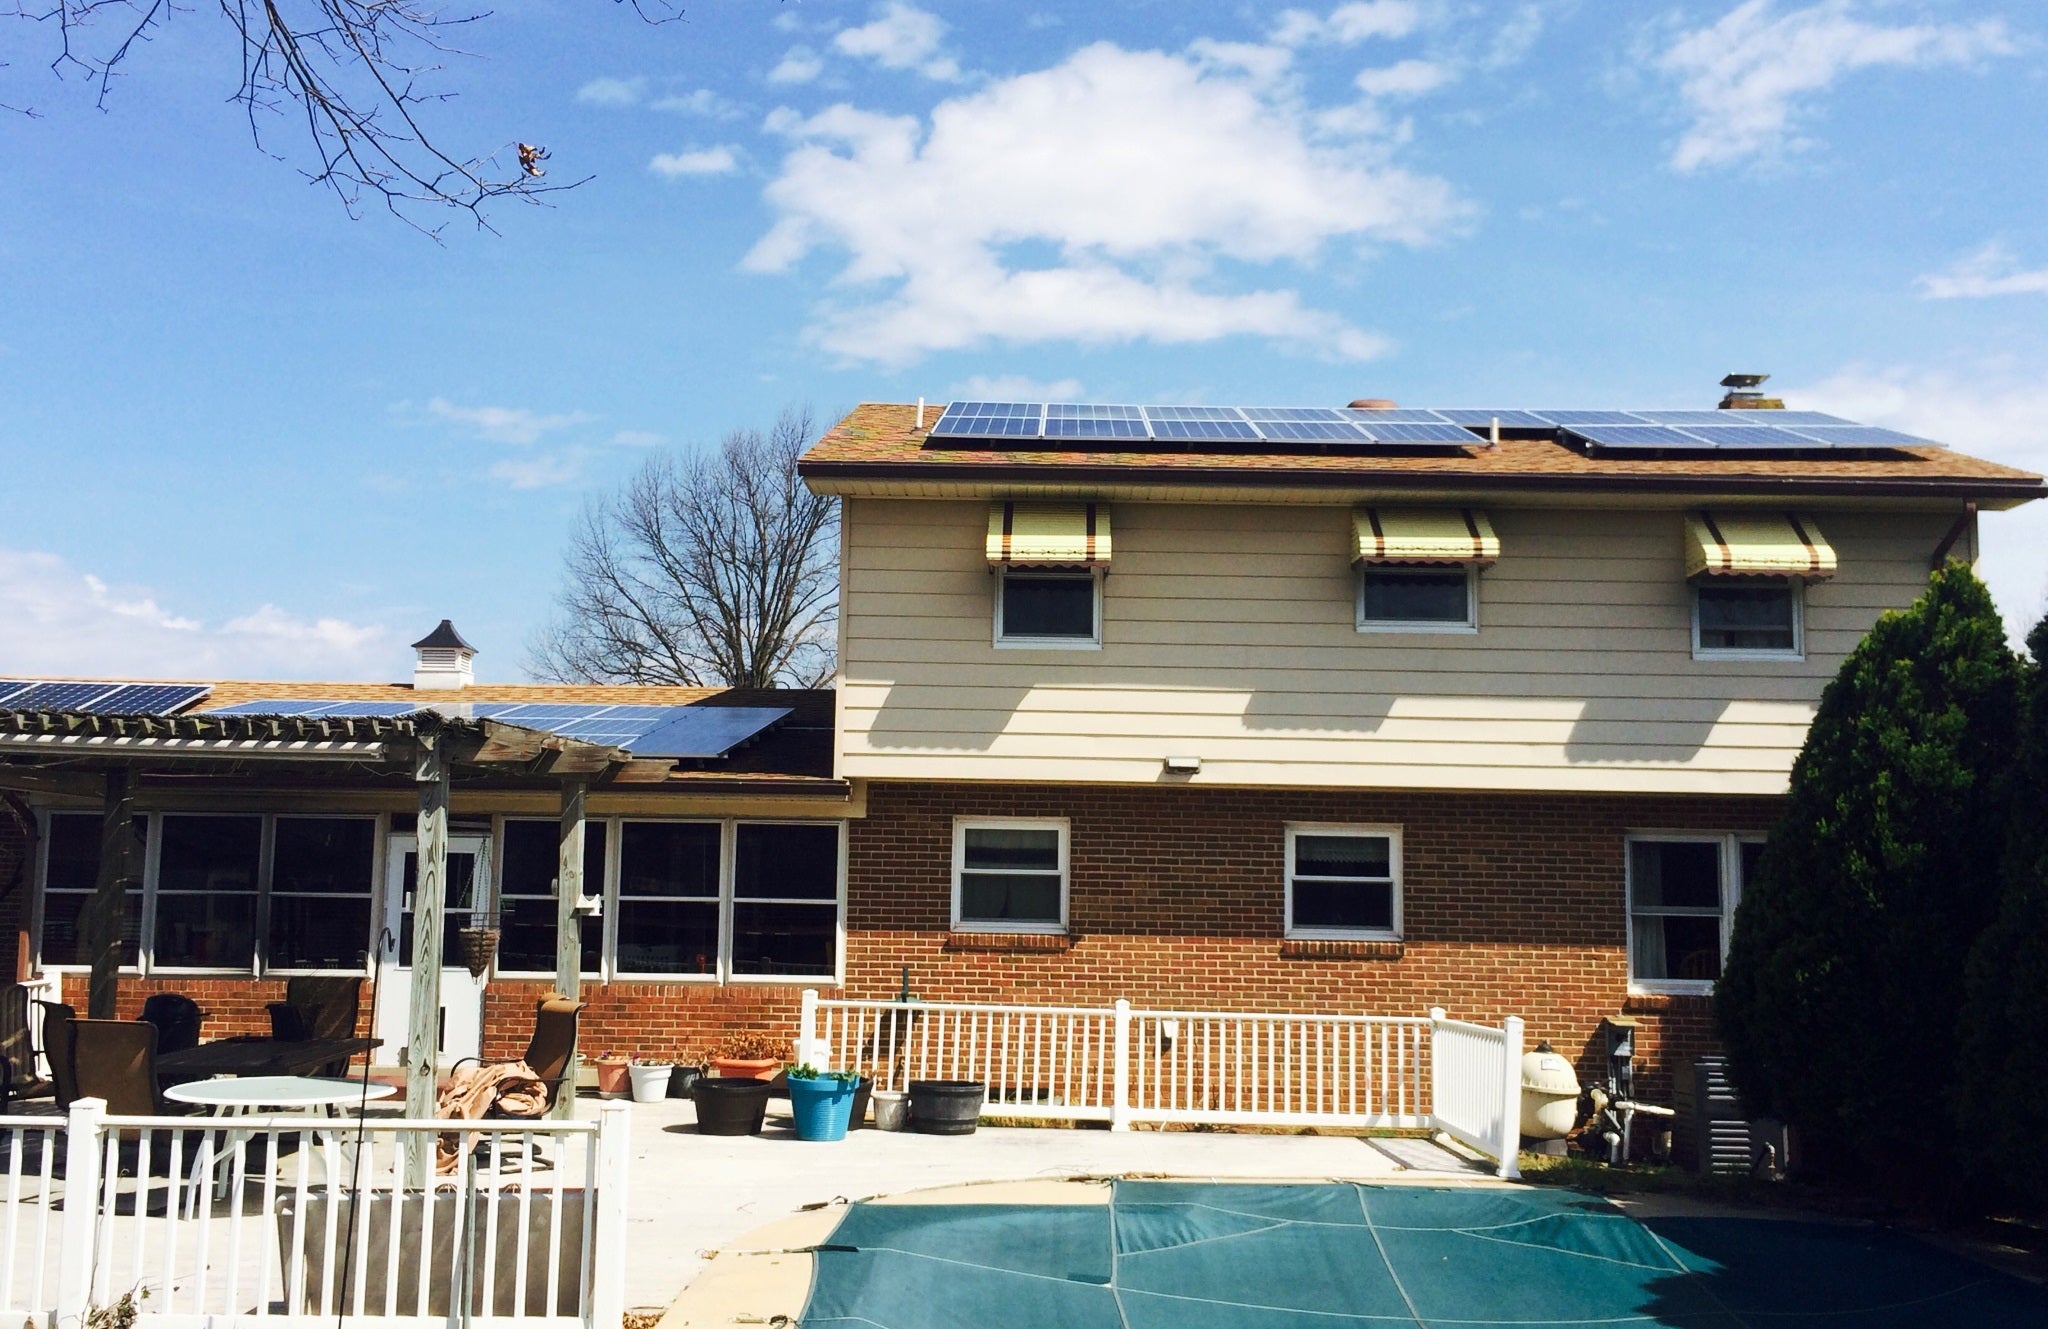 Wonderful system utilizing multiple arrays to cover 95% of electric bill in Frederick, MD